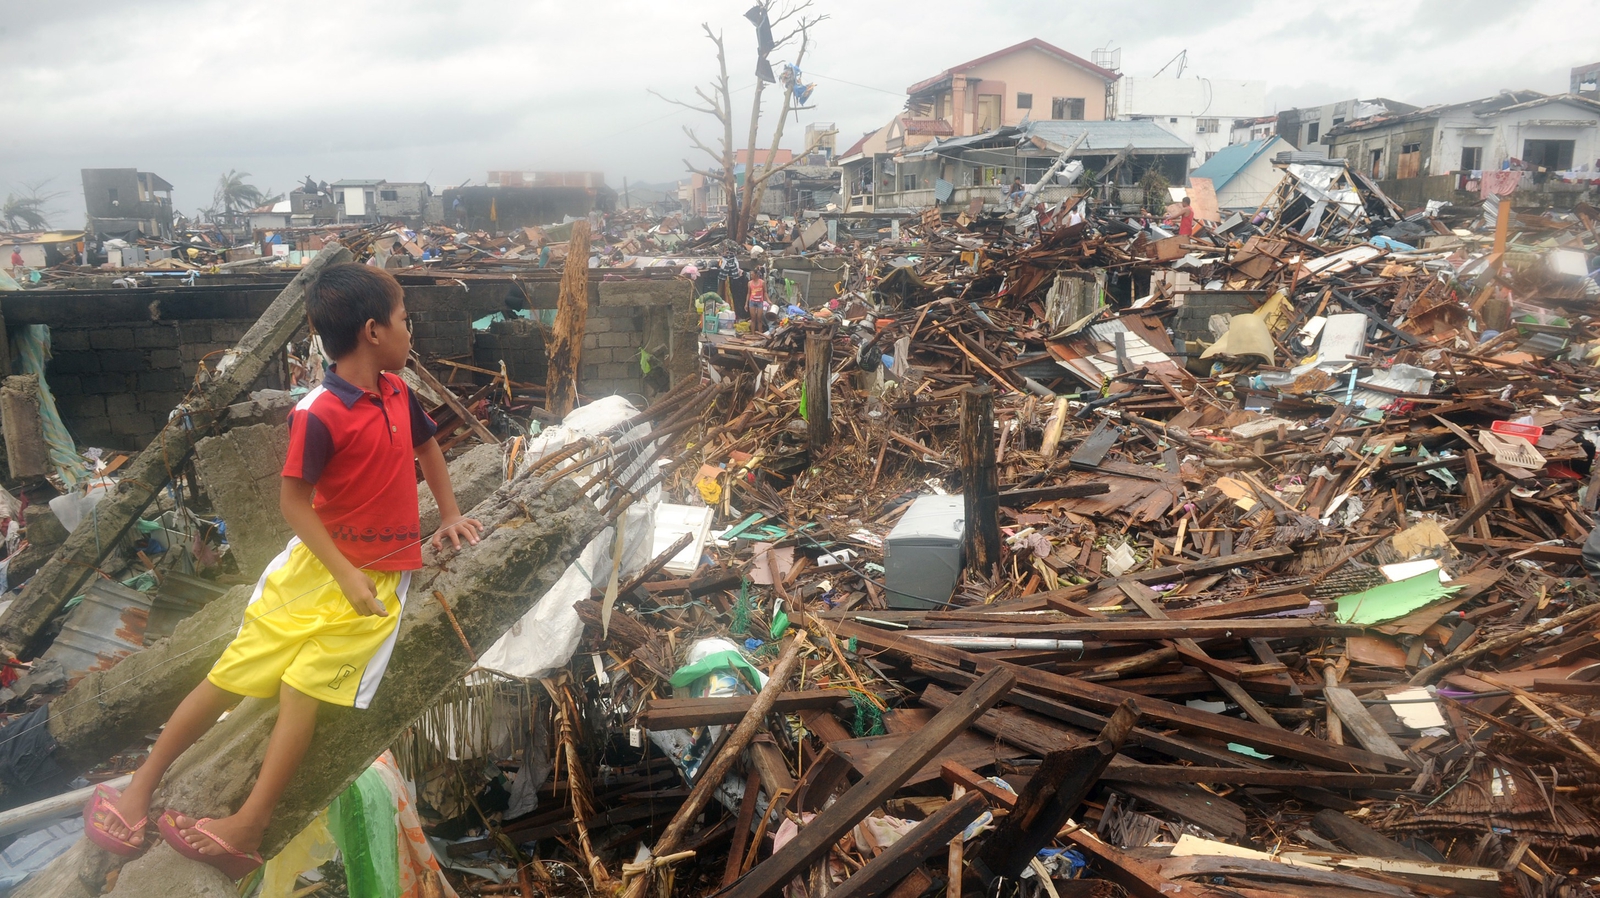 Death toll after Typhoon Haiyan revised downwards